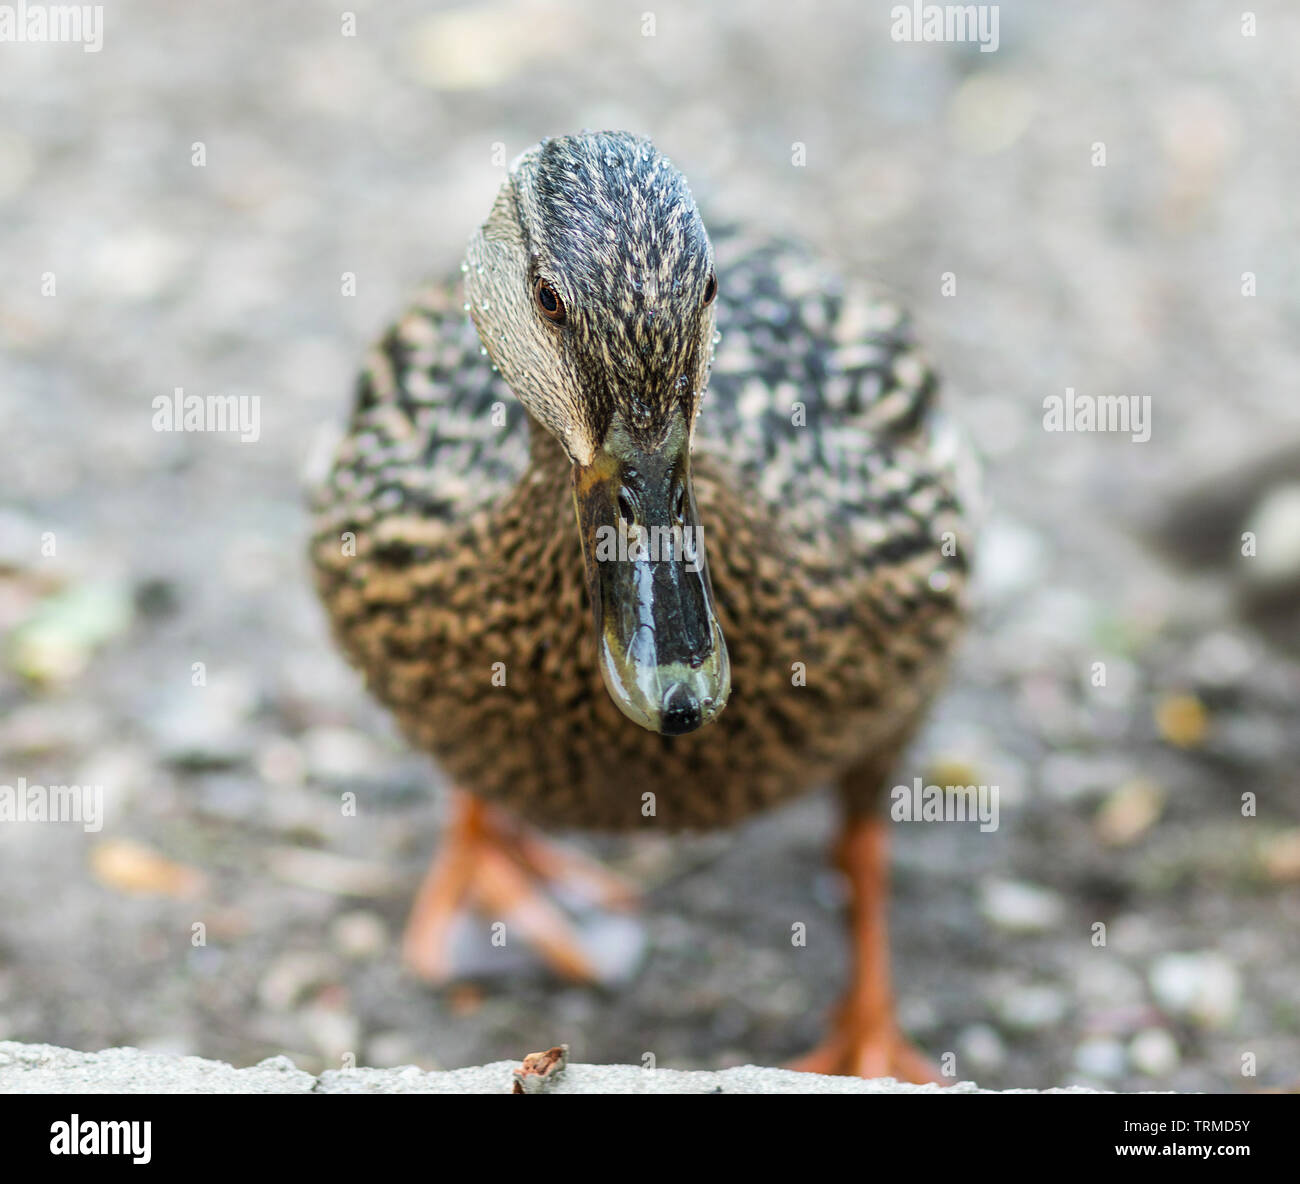 A female mallard duck is up close and staring straight into the camera with the background blurry. Stock Photo